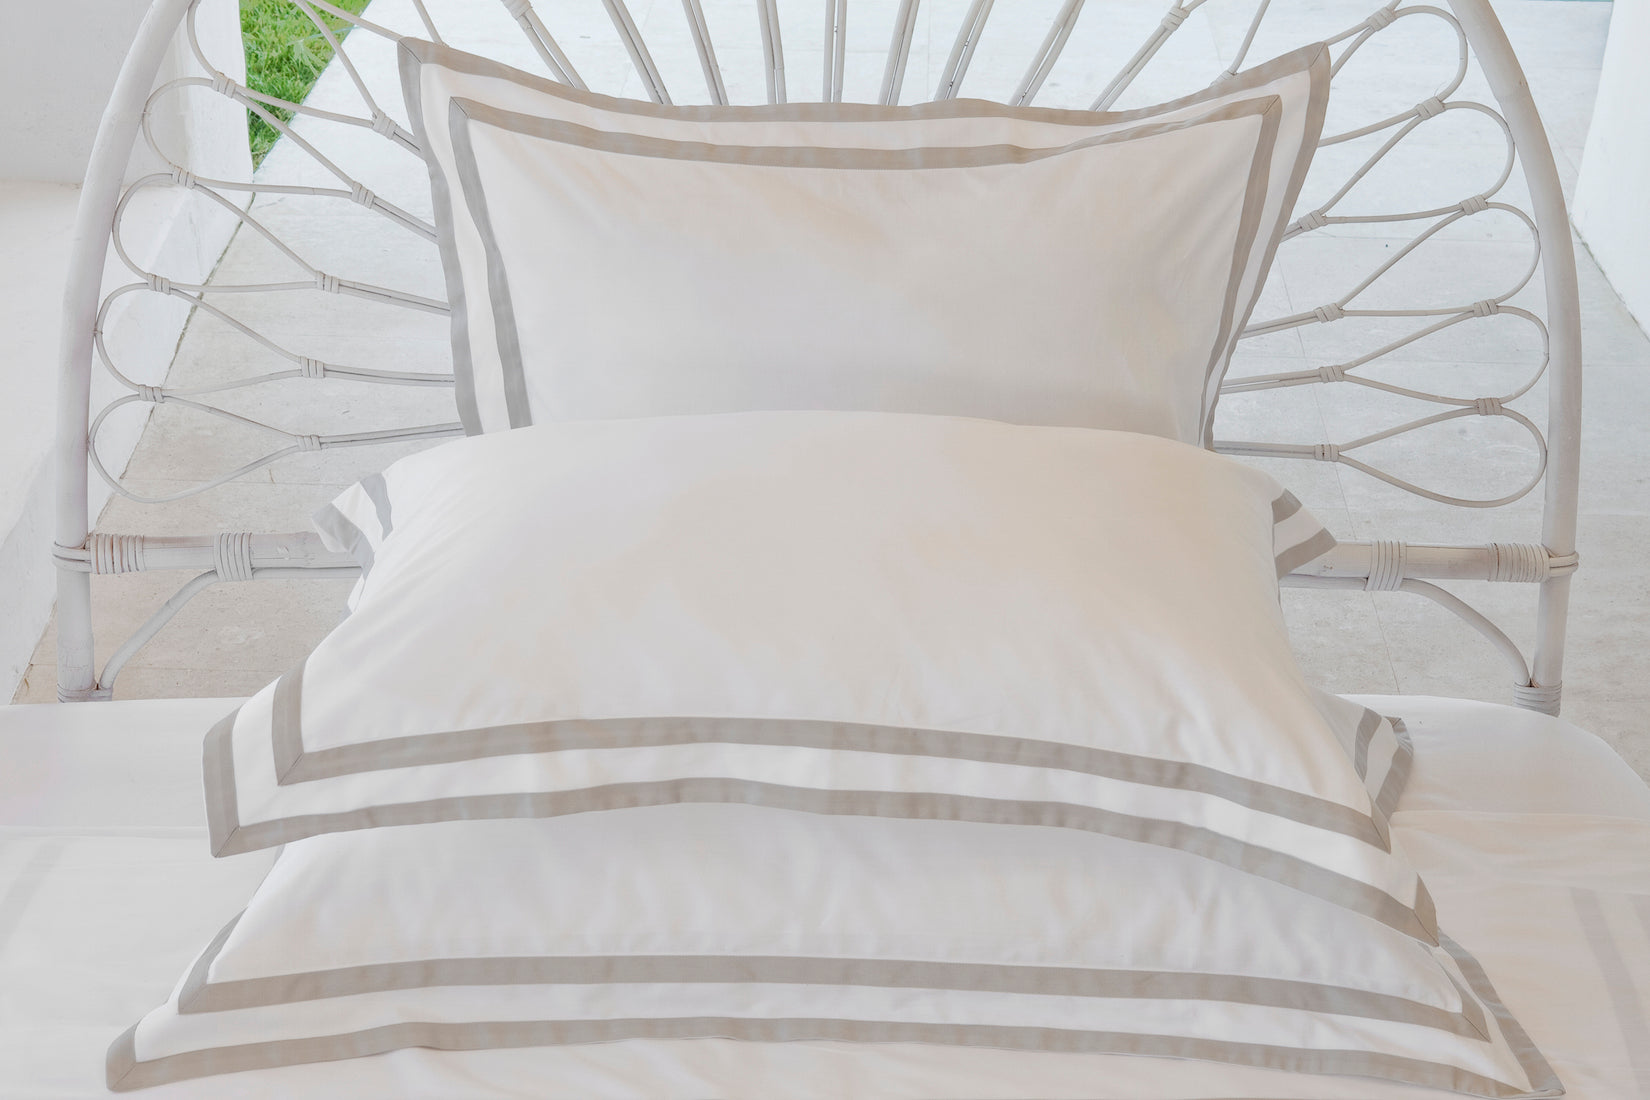 King Quilt Cover White & Ash Formentera